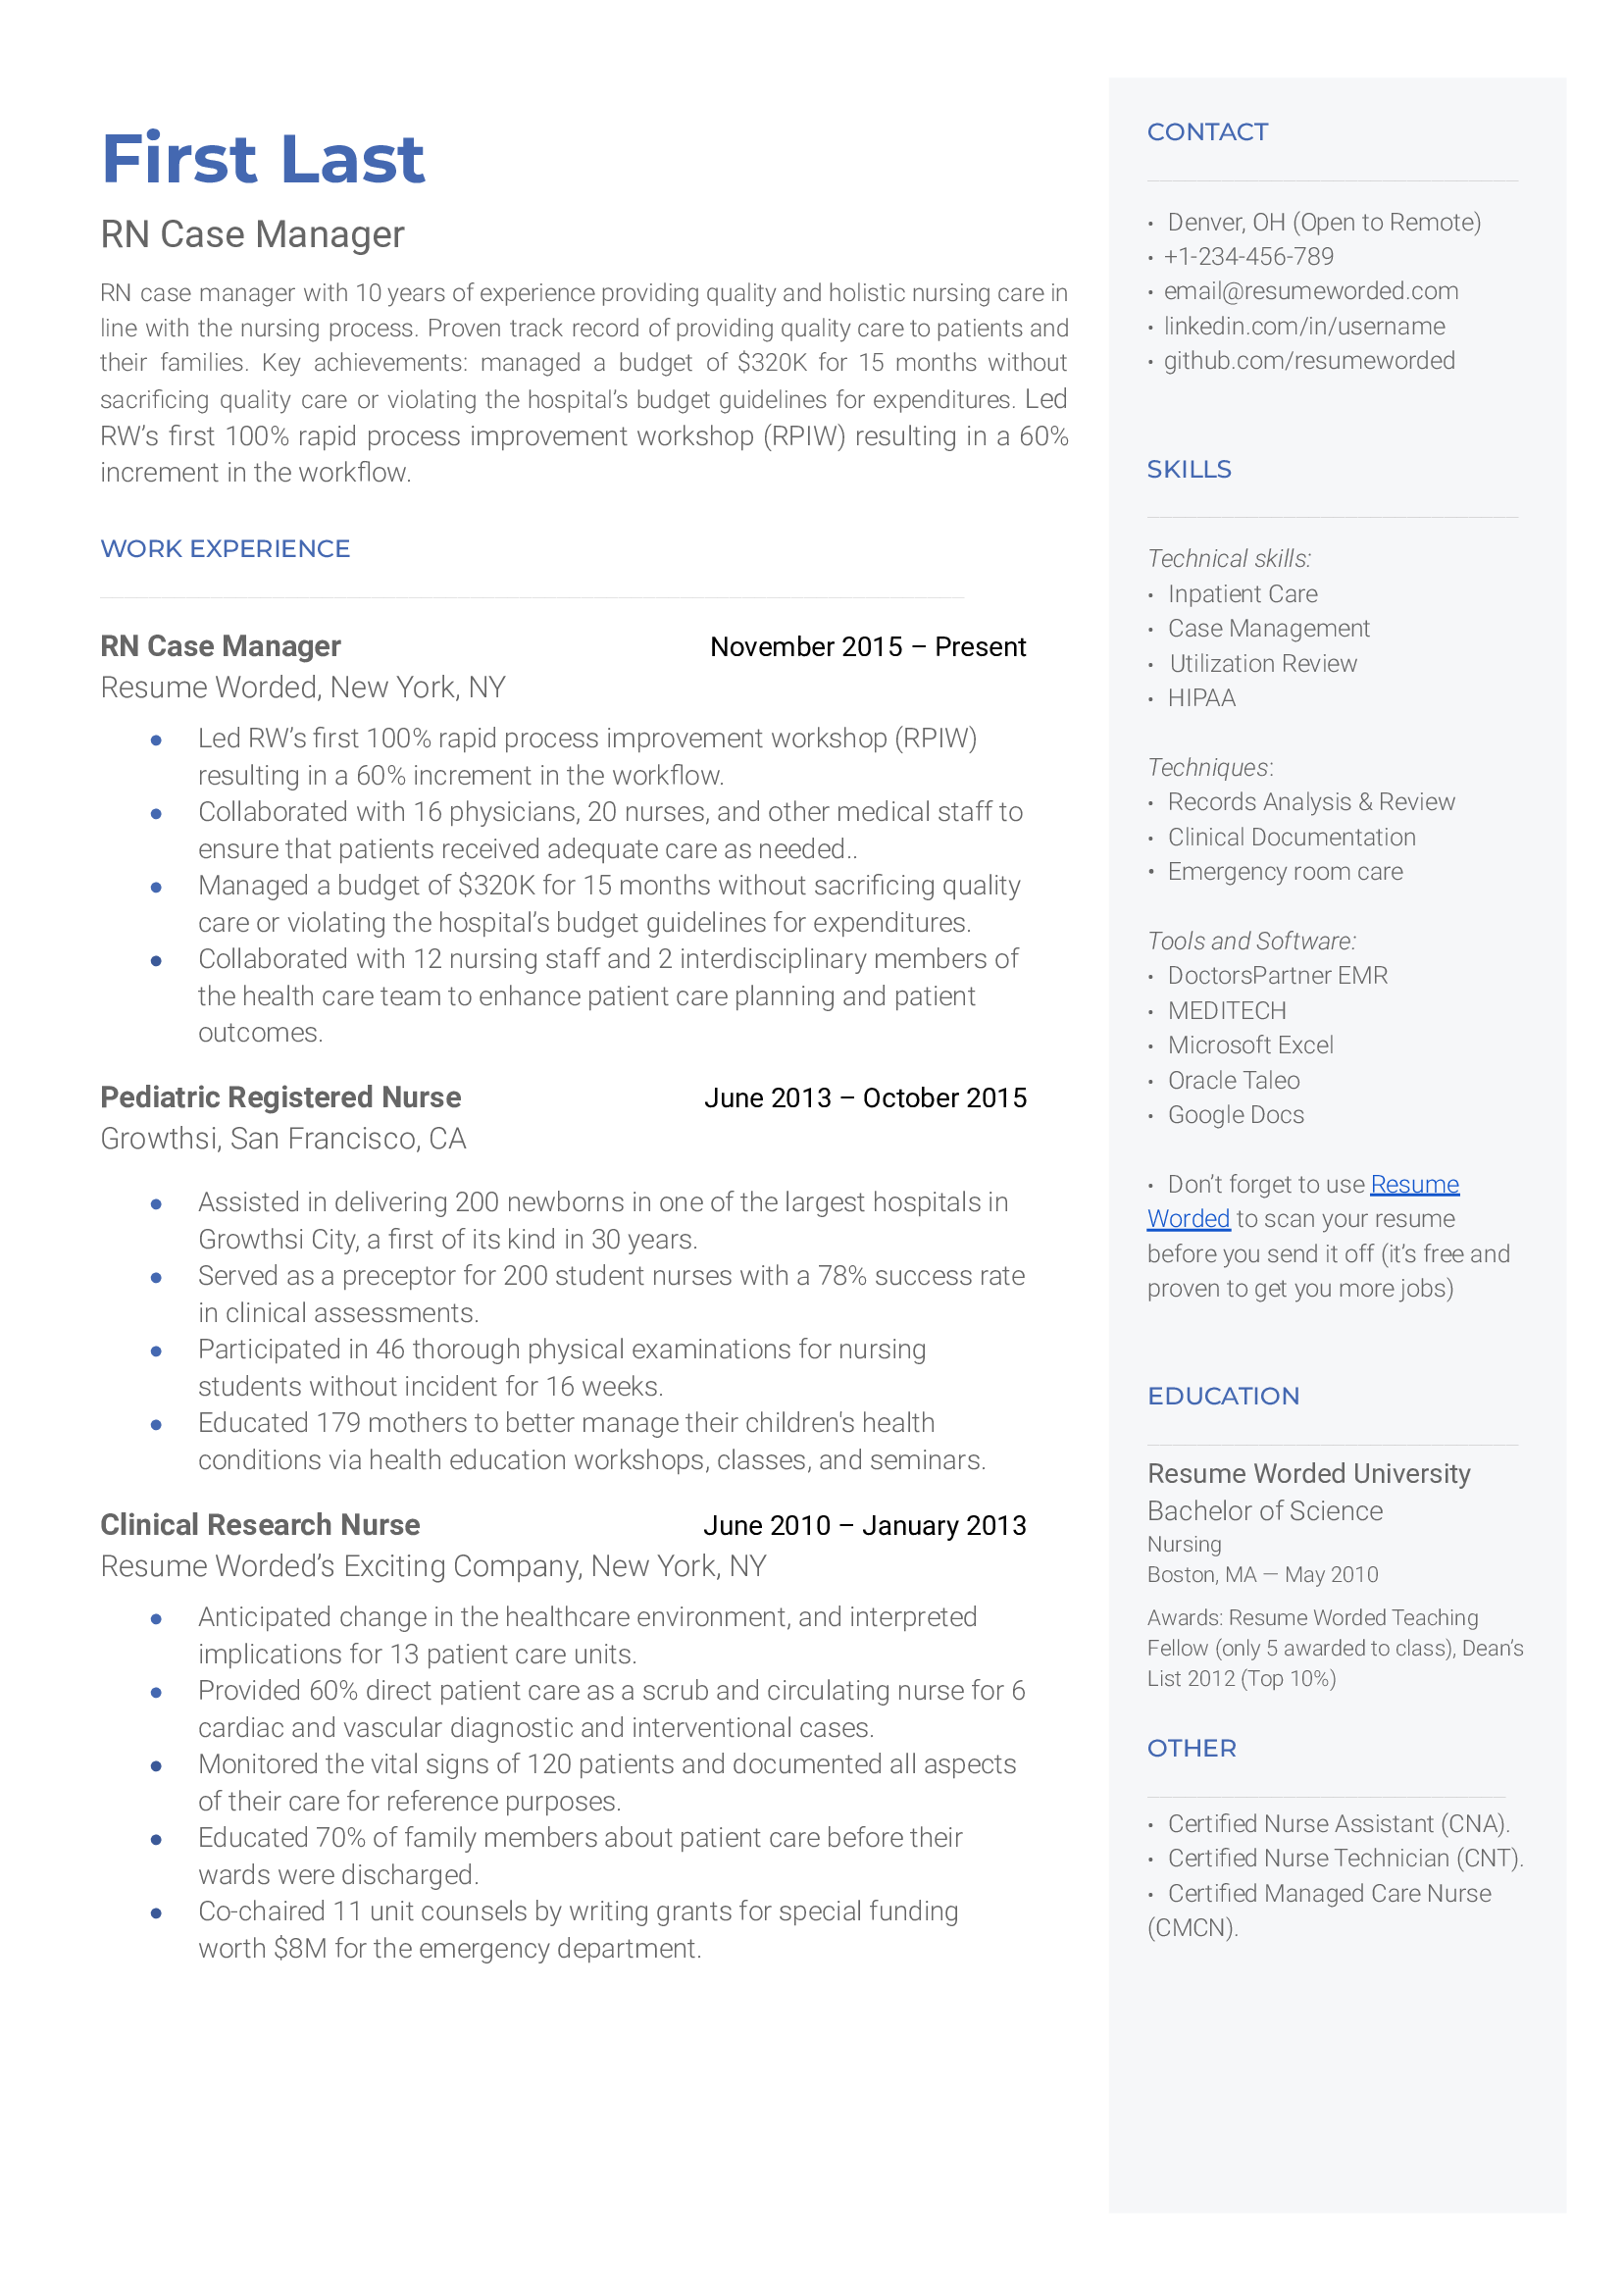 A neatly organized RN Case Manager CV, showcasing healthcare and business skills.